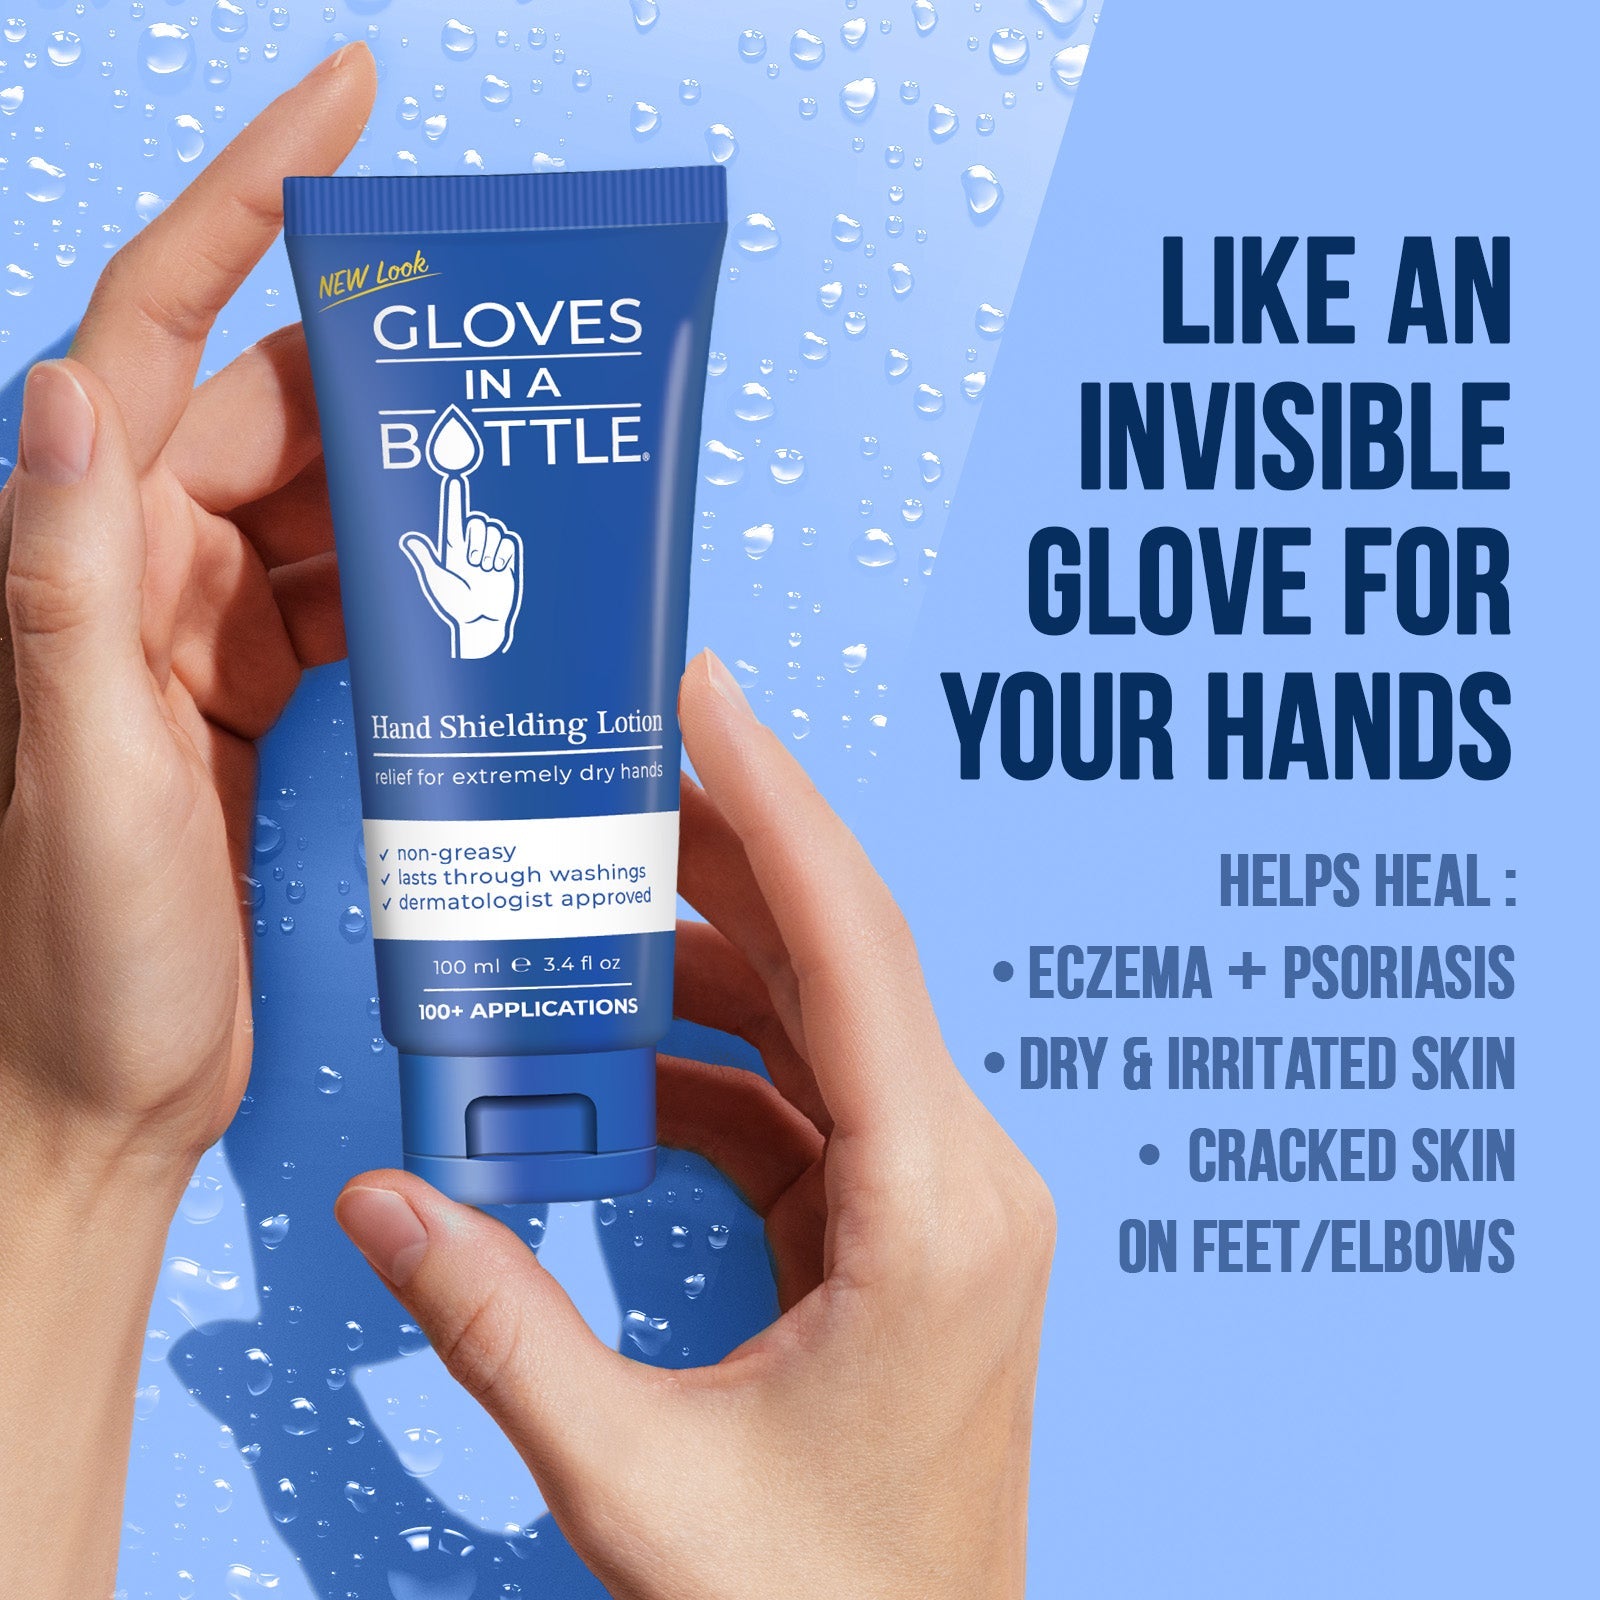 Gloves In A Bottle Hand Shielding Lotion for Dry Skin, 3.4 Ounce, 3 pack